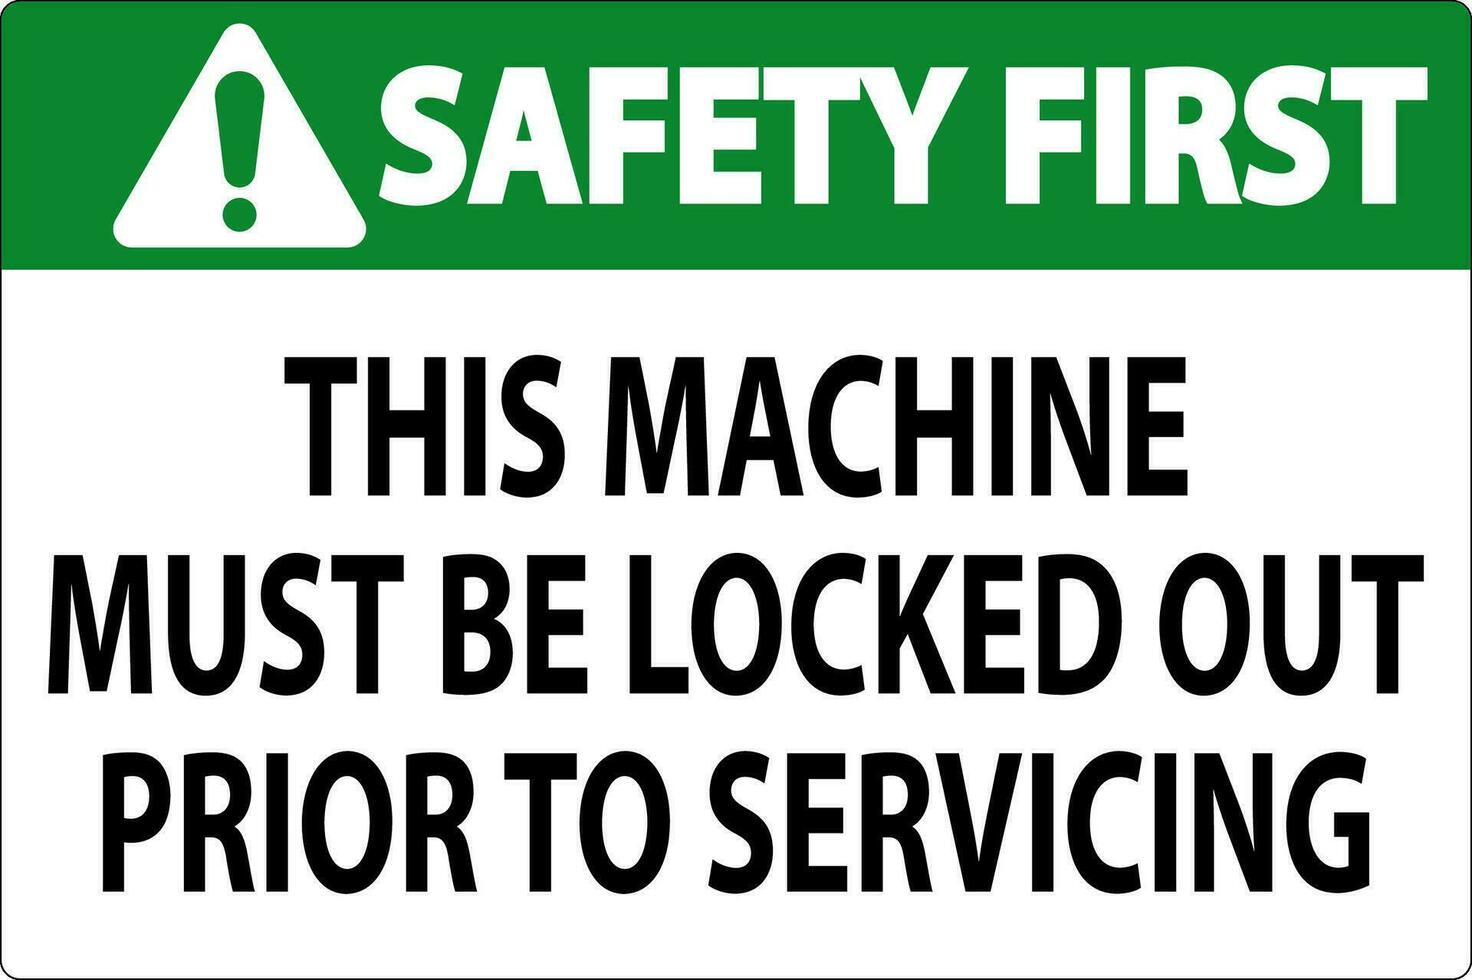 Safety First Machine Sign This Machine Must Be Locked Out Prior To Servicing vector